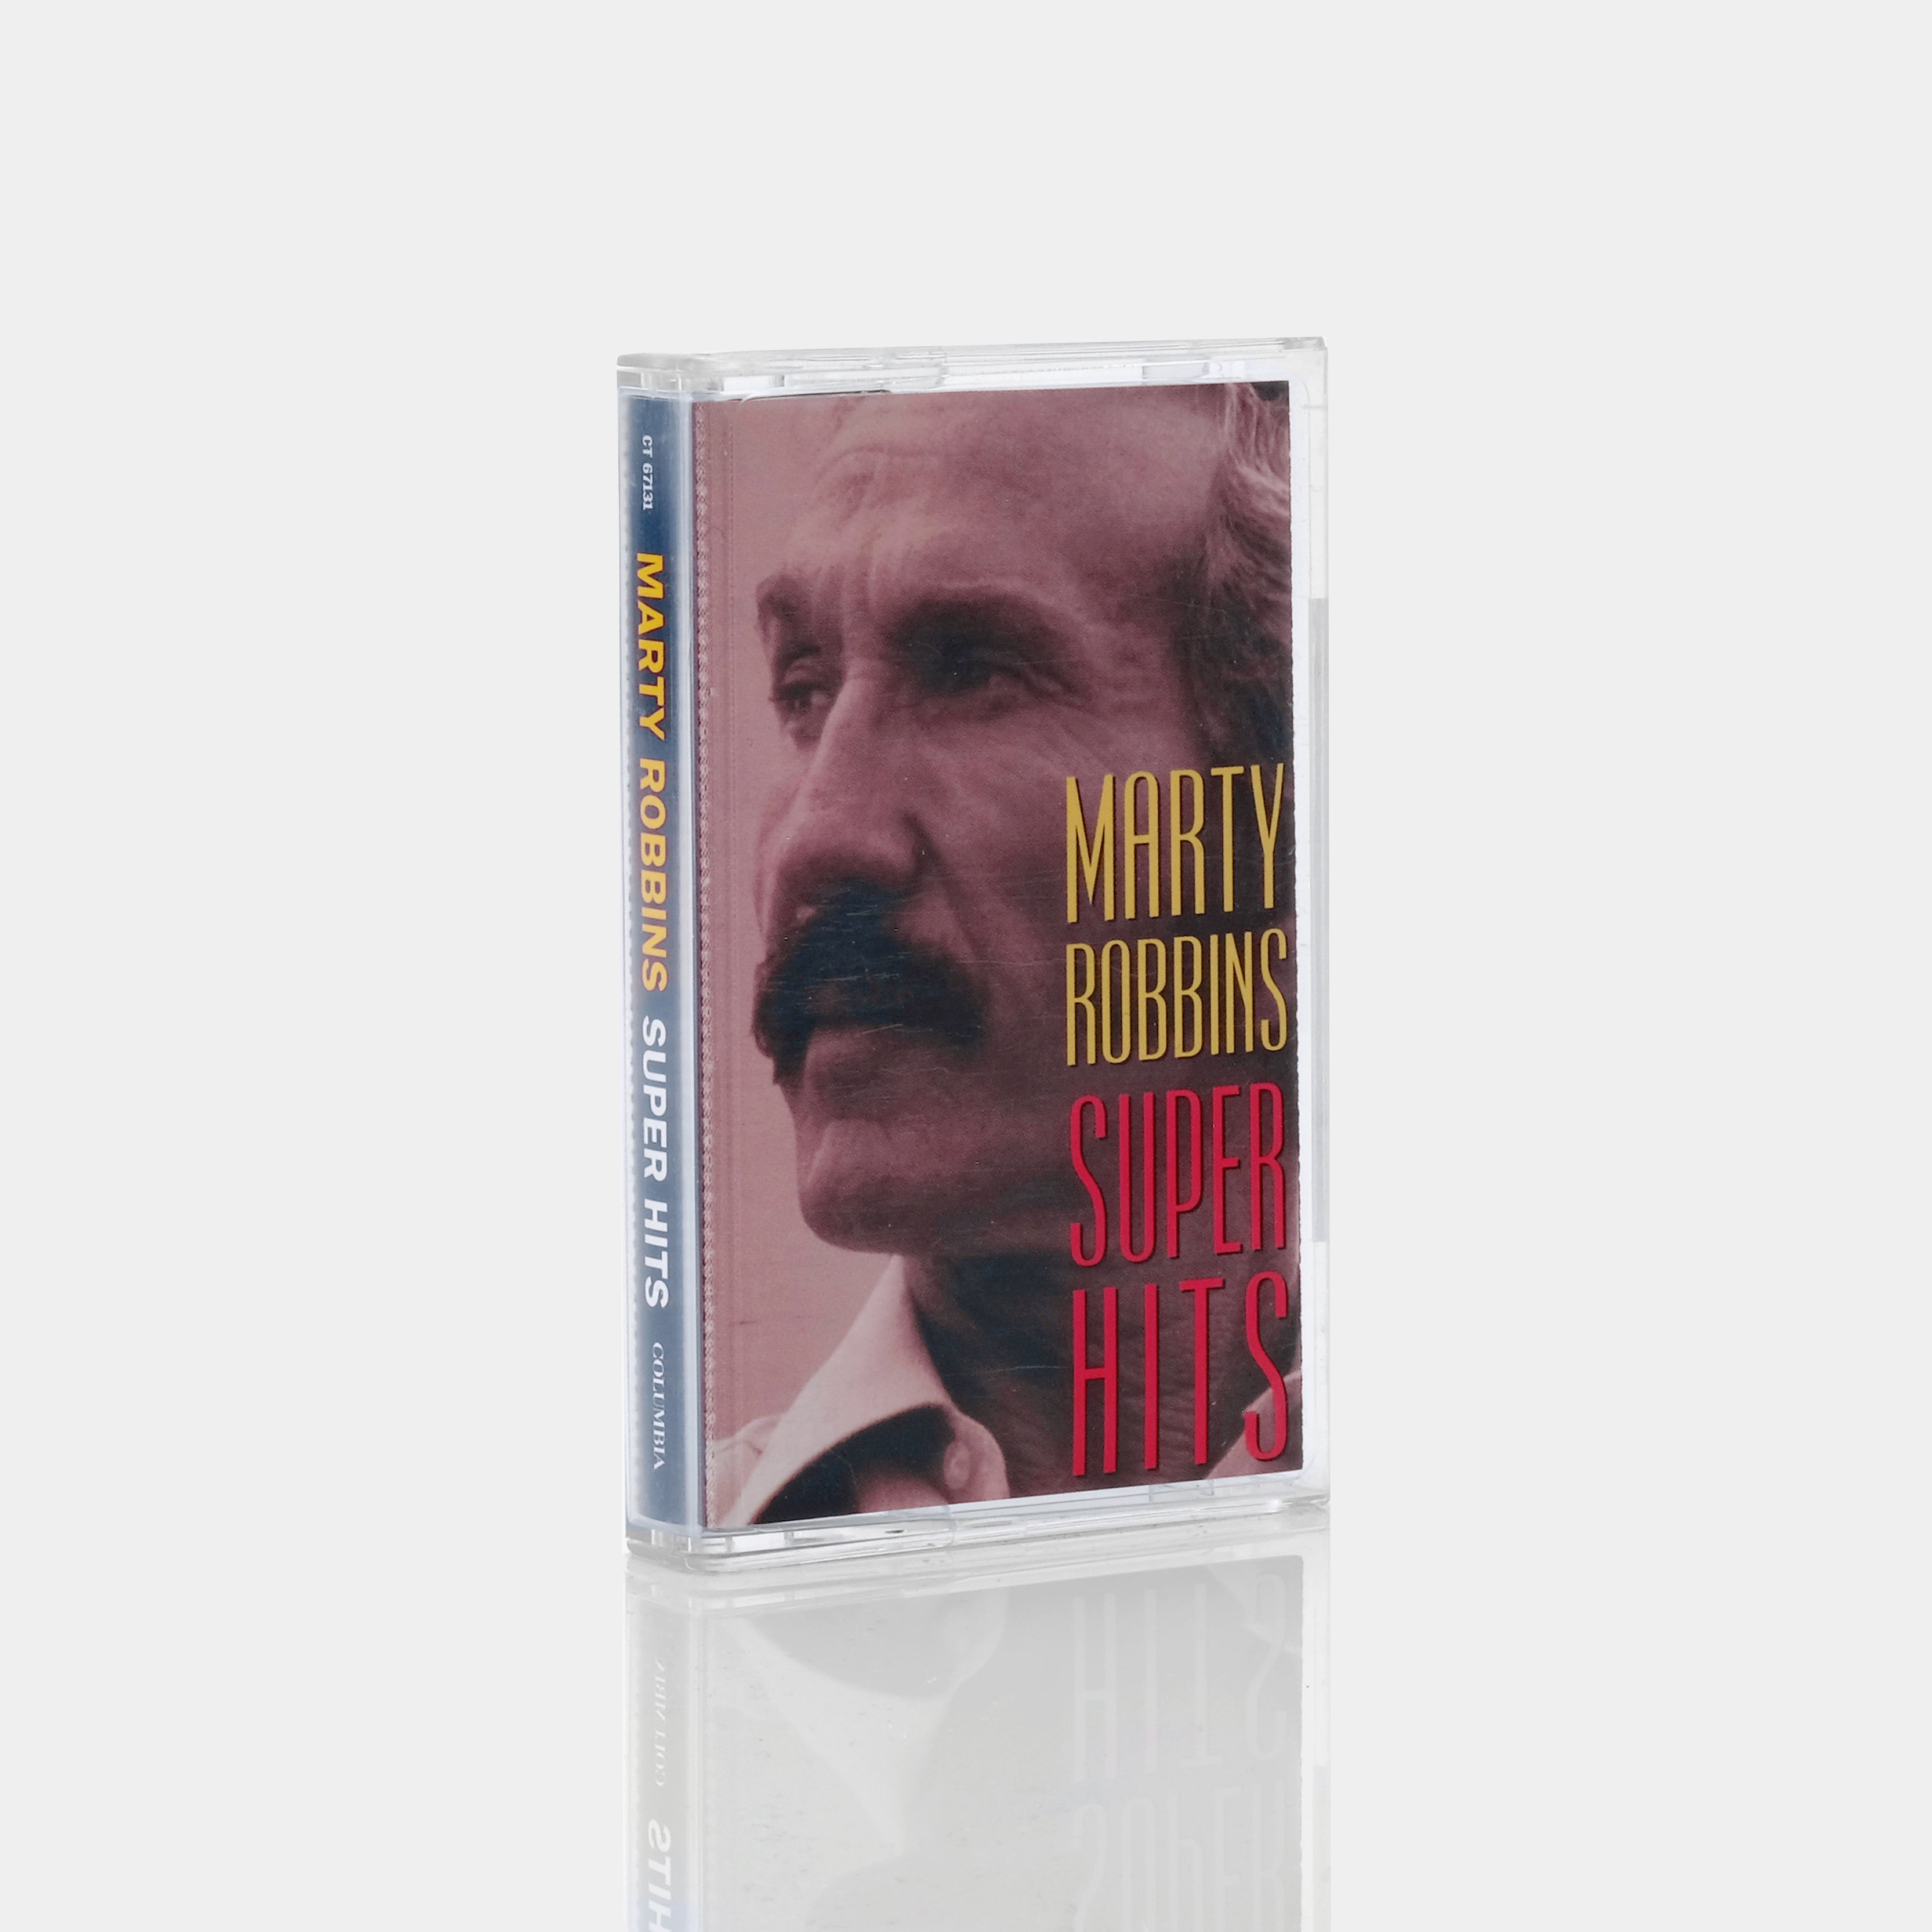 Marty Robbins - Super Hits Cassette Tape